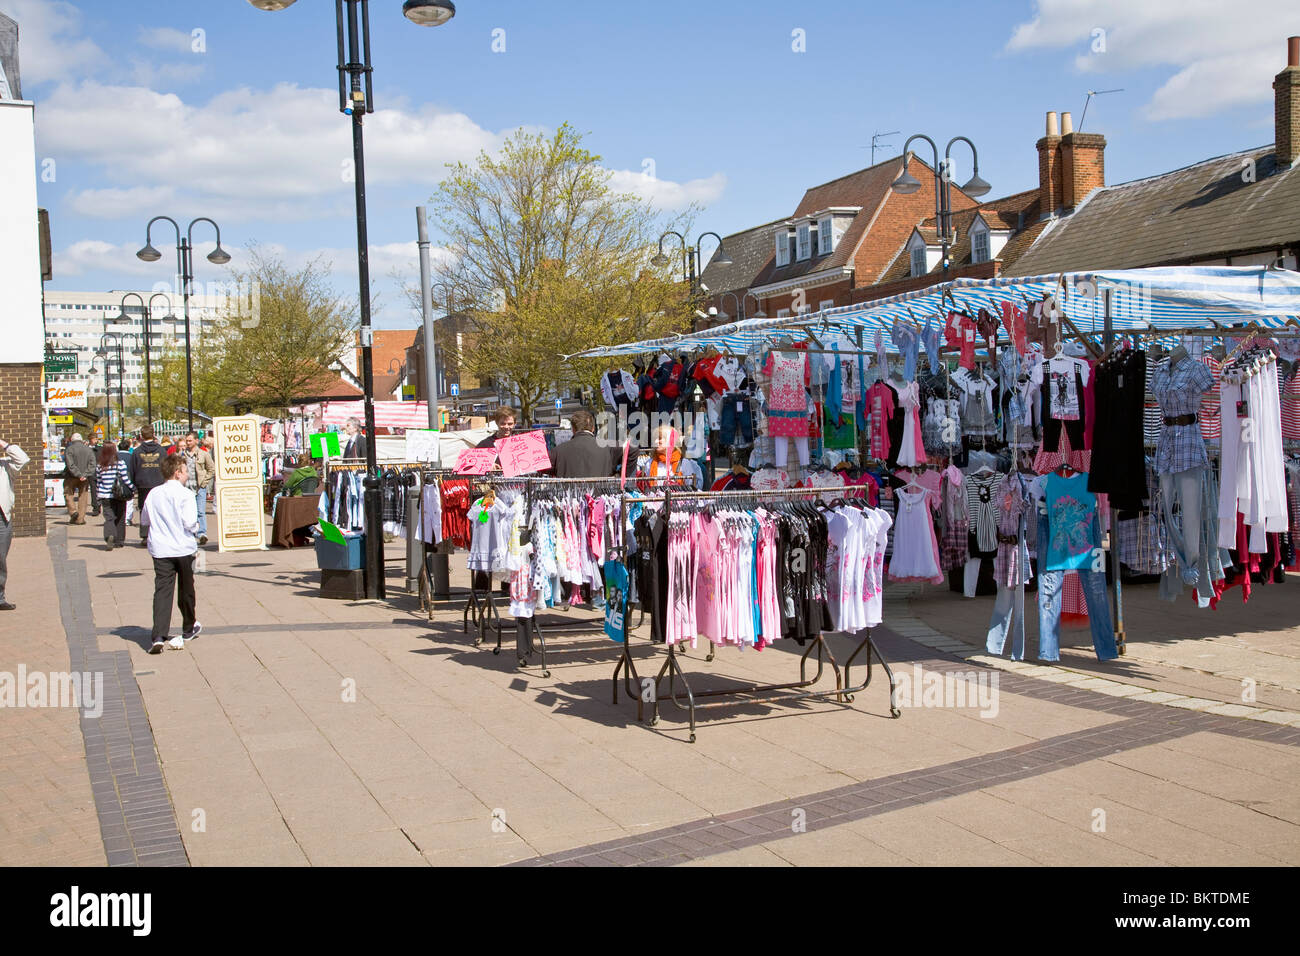 Market stall selling clothing in the Hertfordshire town of Hoddesdon Stock Photo